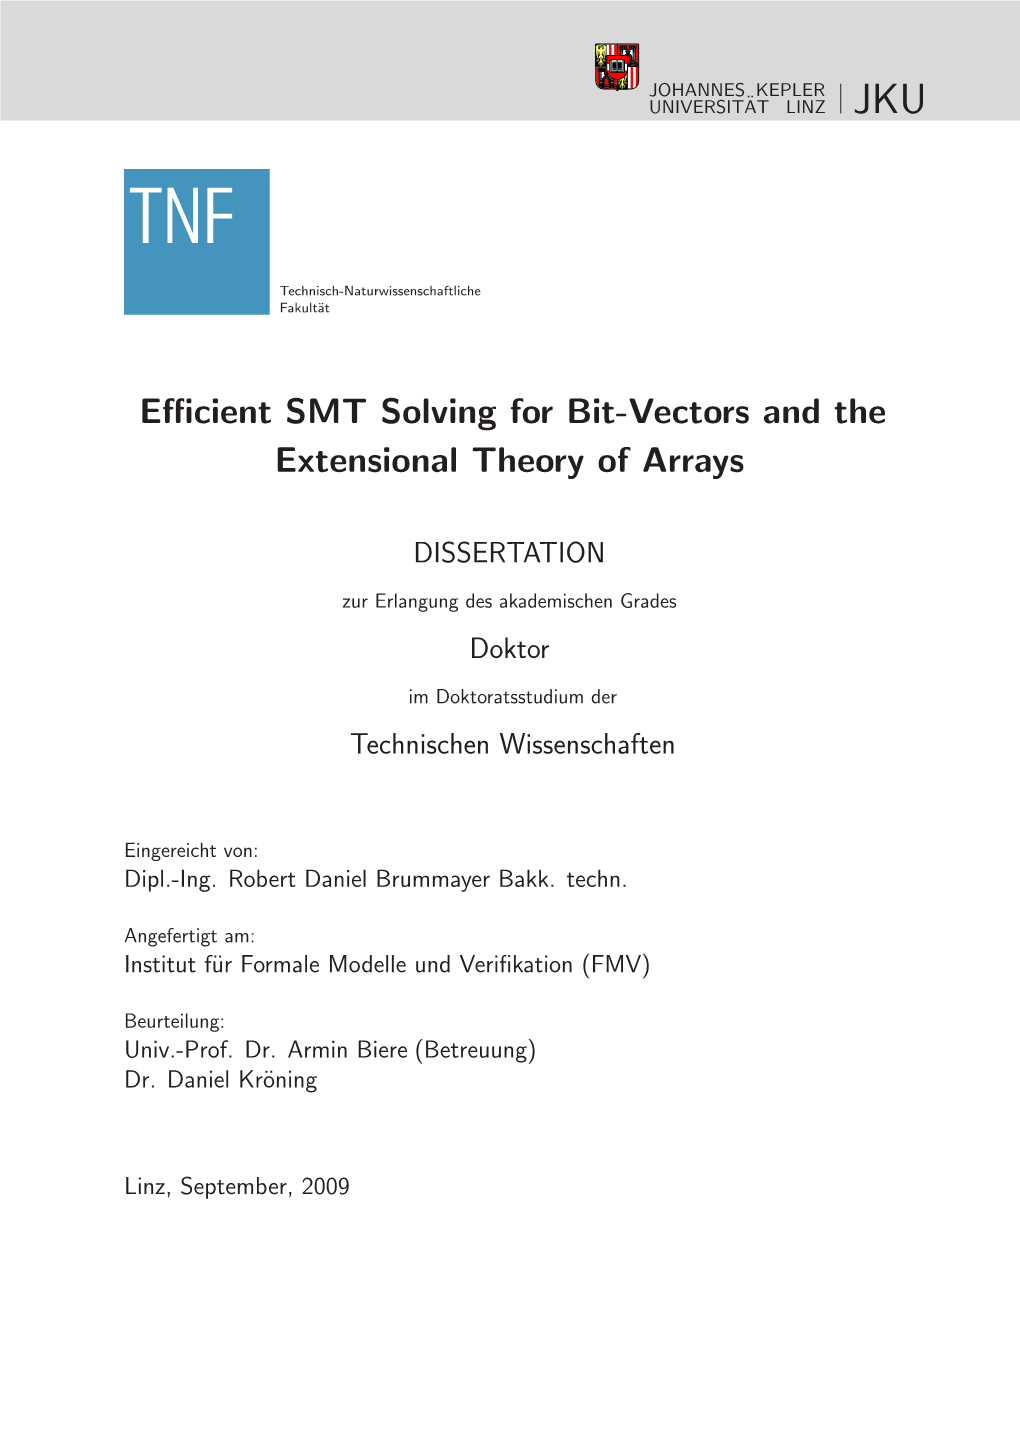 Efficient SMT Solving for Bit-Vectors and the Extensional Theory of Arrays